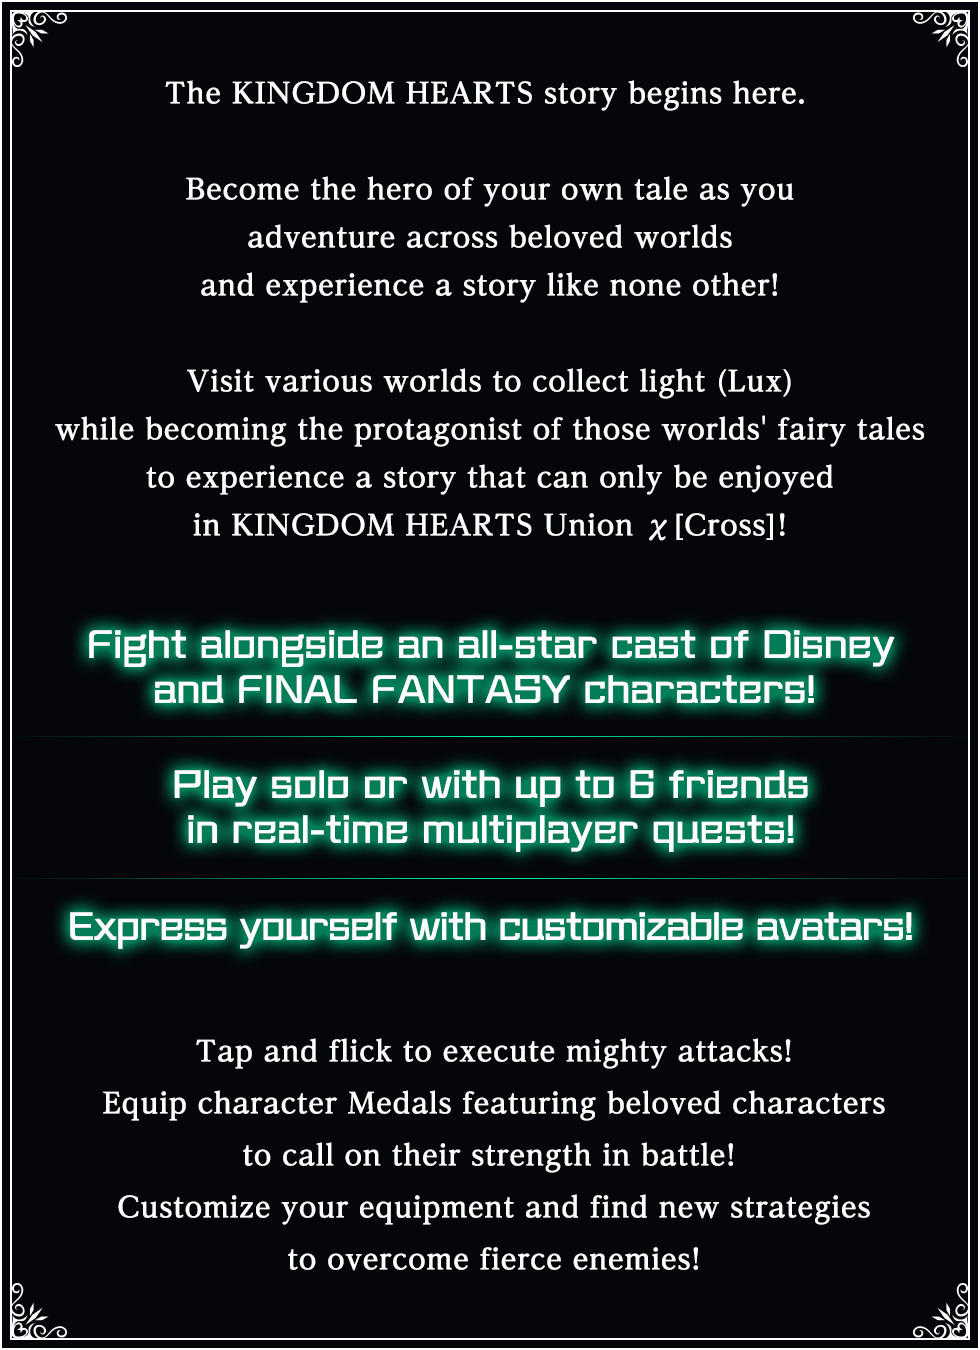 Become the hero of your own tale as you adventure across beloved worlds and experience a story like none other!